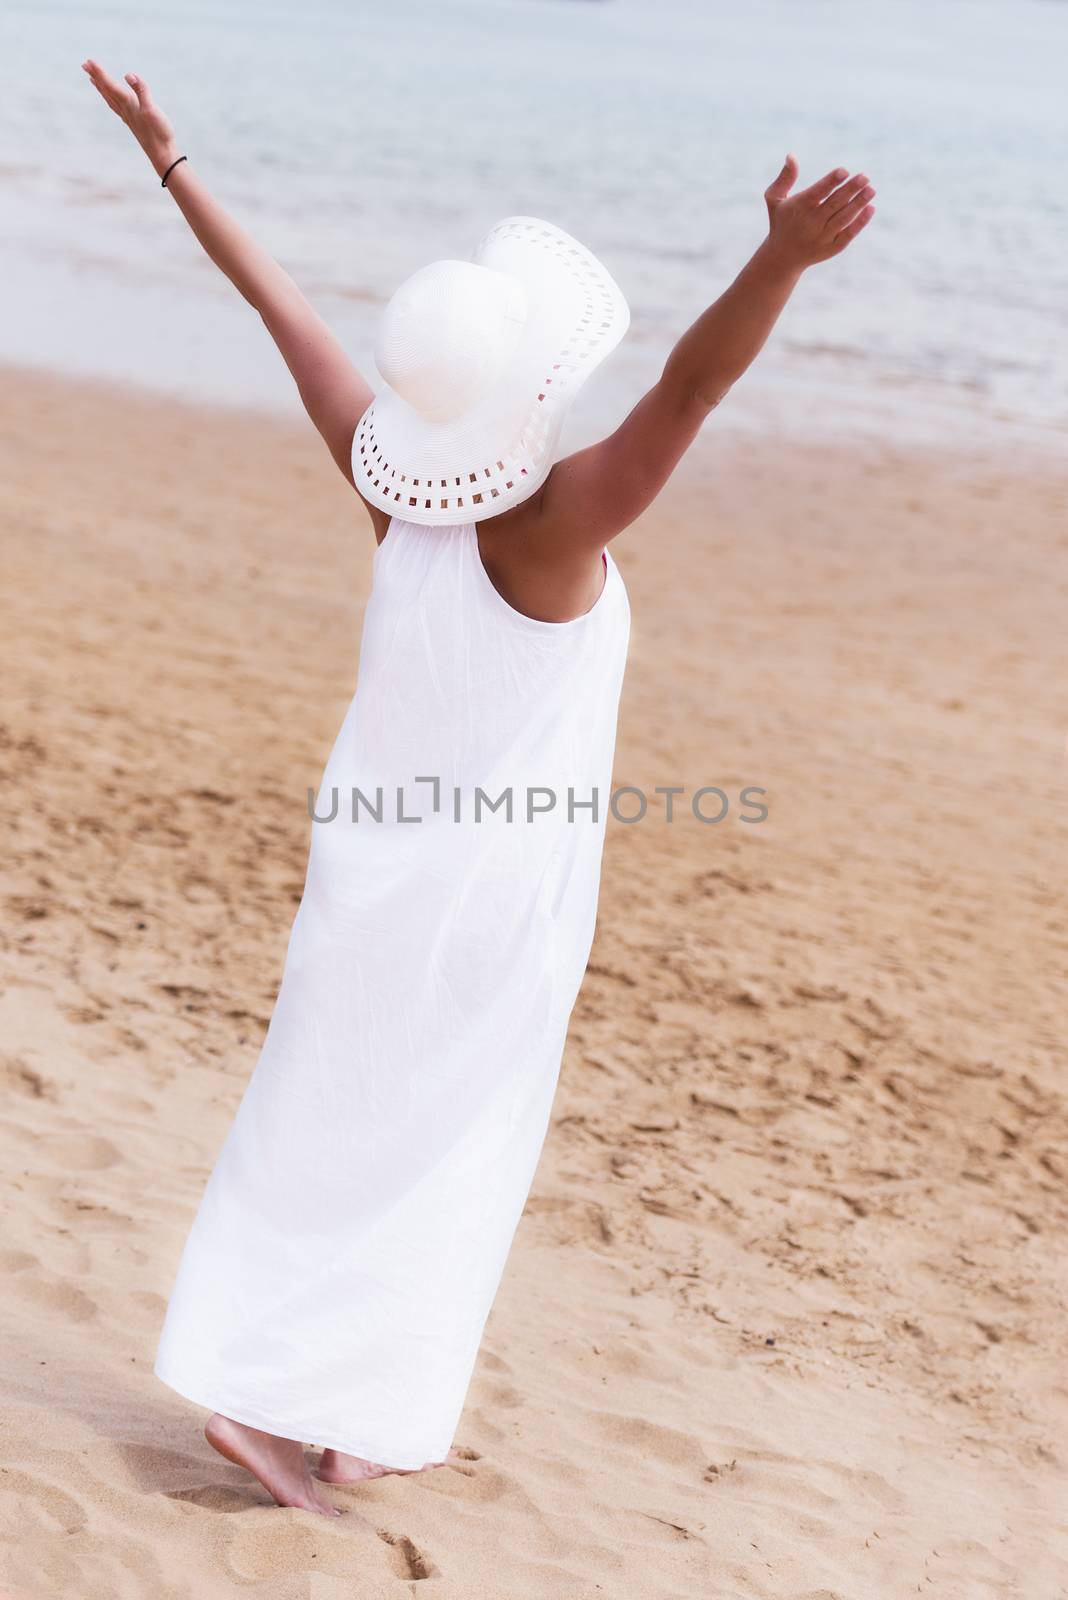 Barefoot girl in white hat and dress standing on a beach with ha by Nanisimova